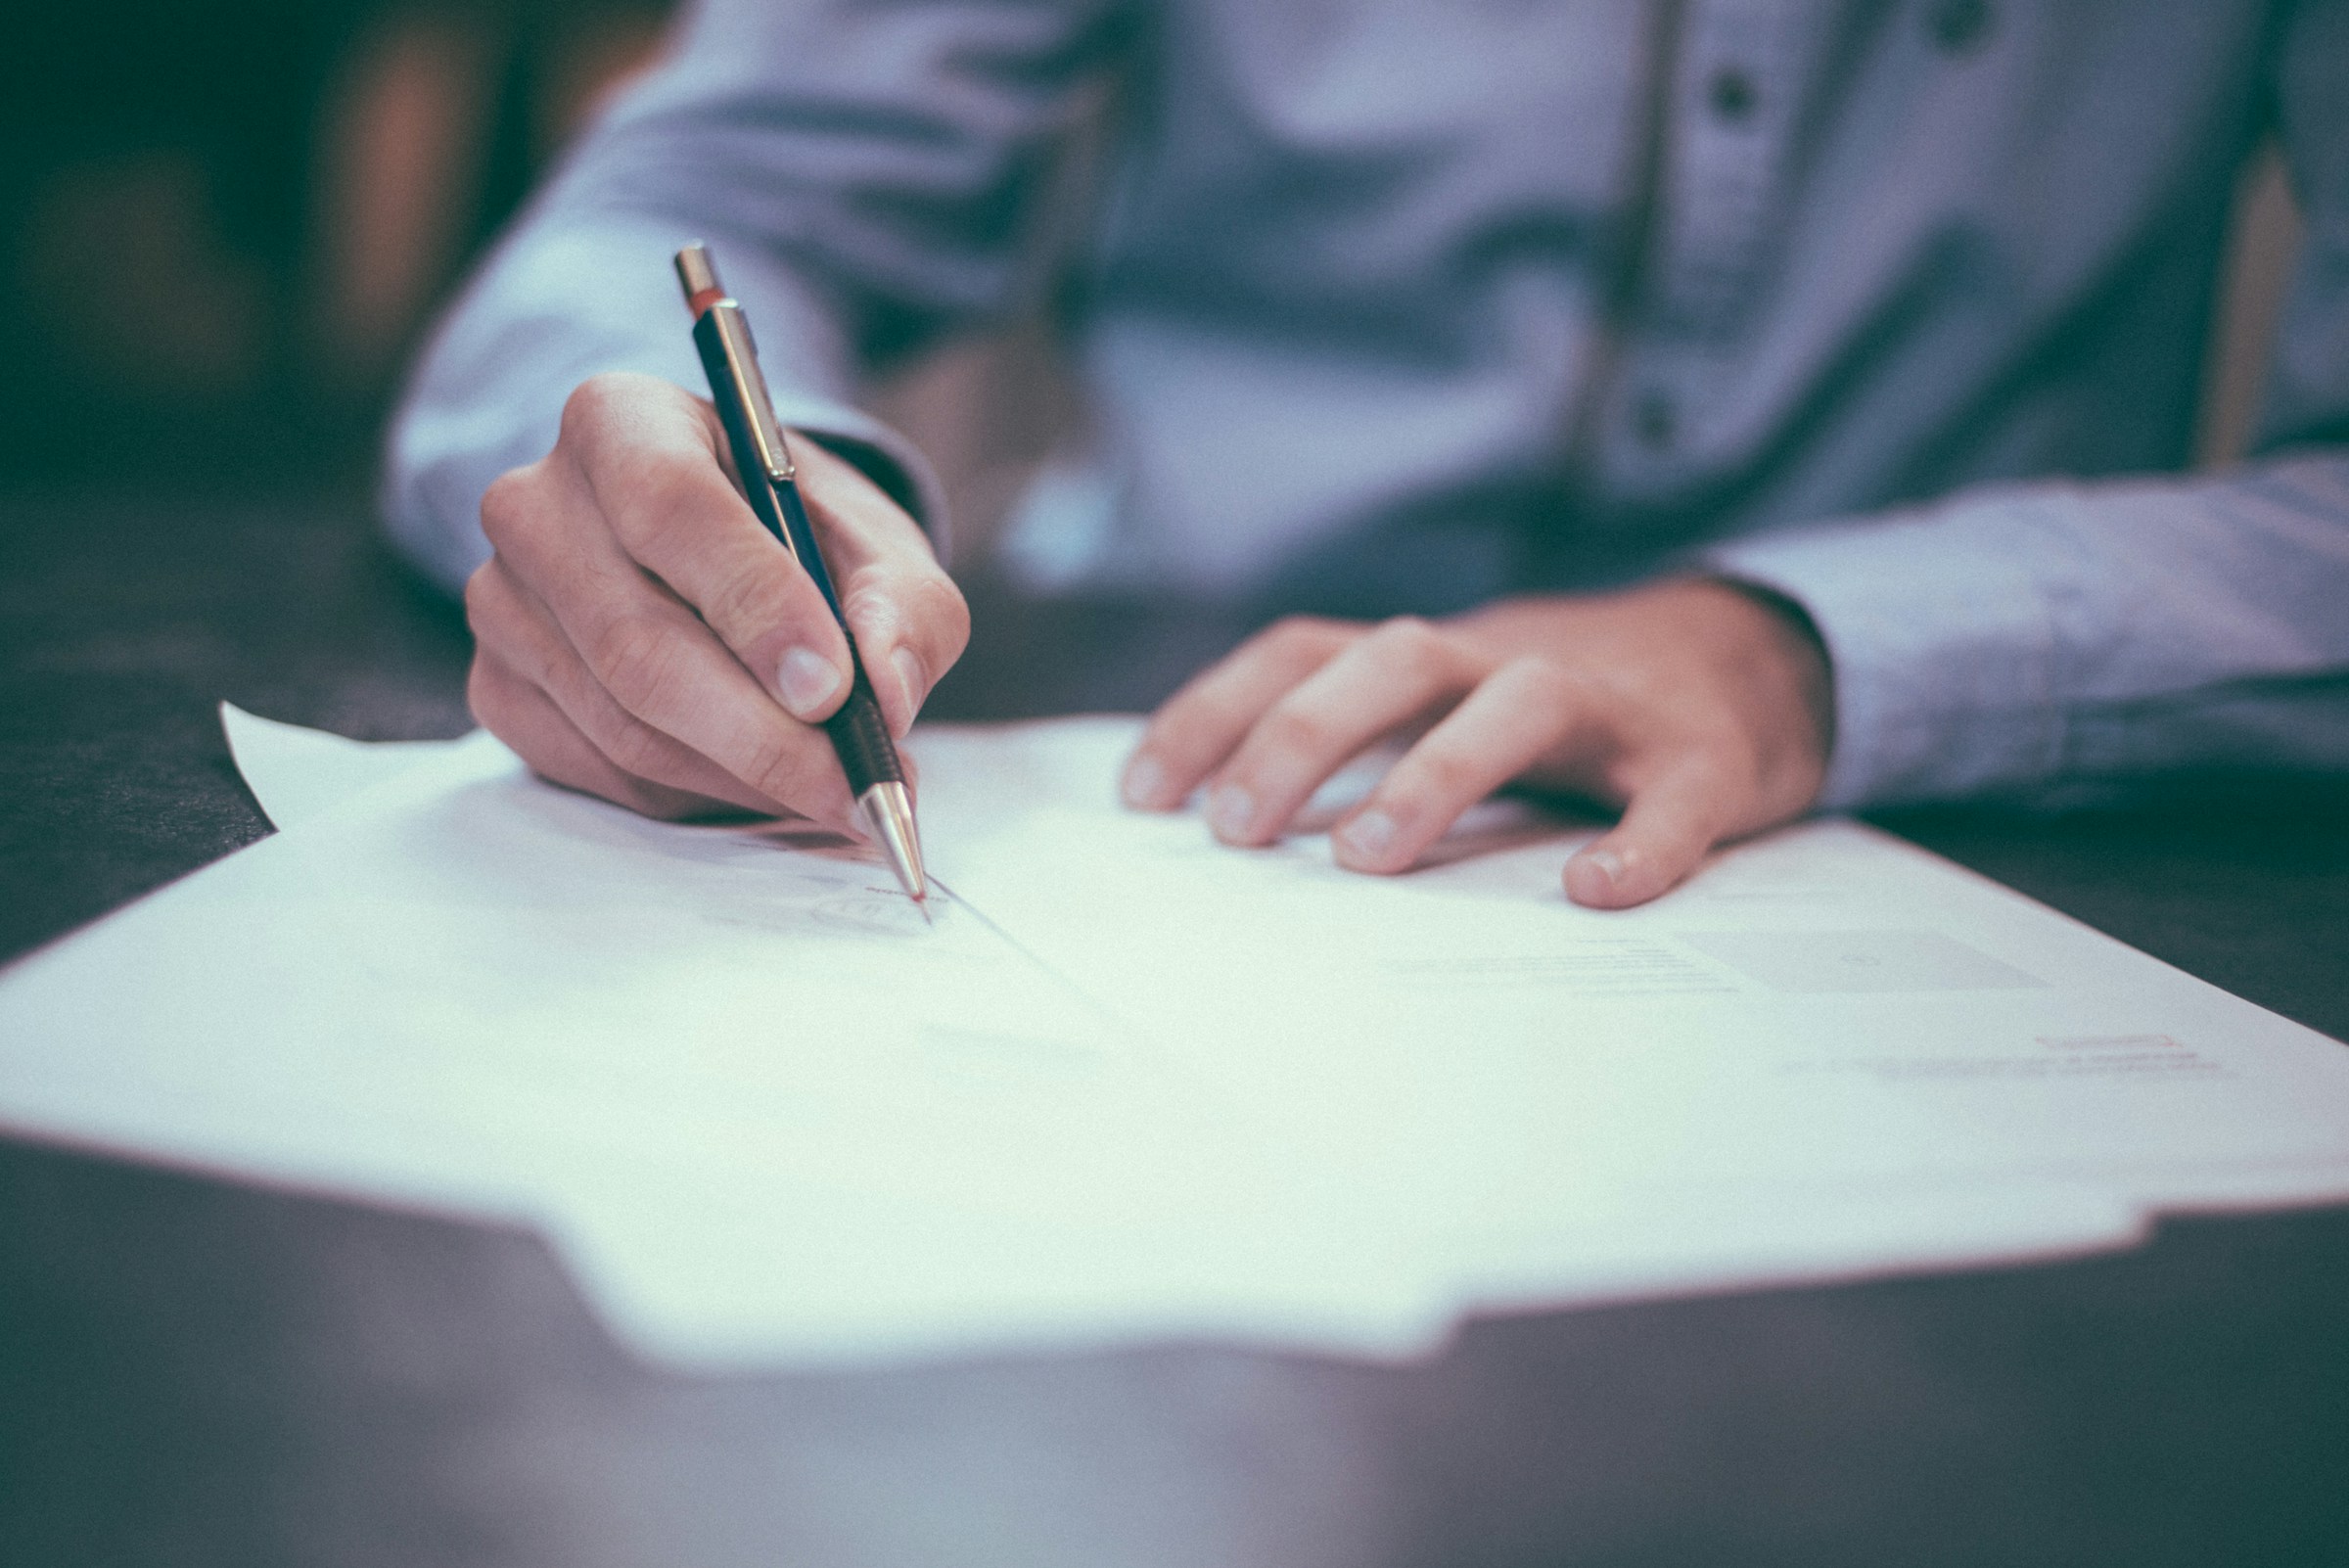 A person signing a document | Source: Unsplash